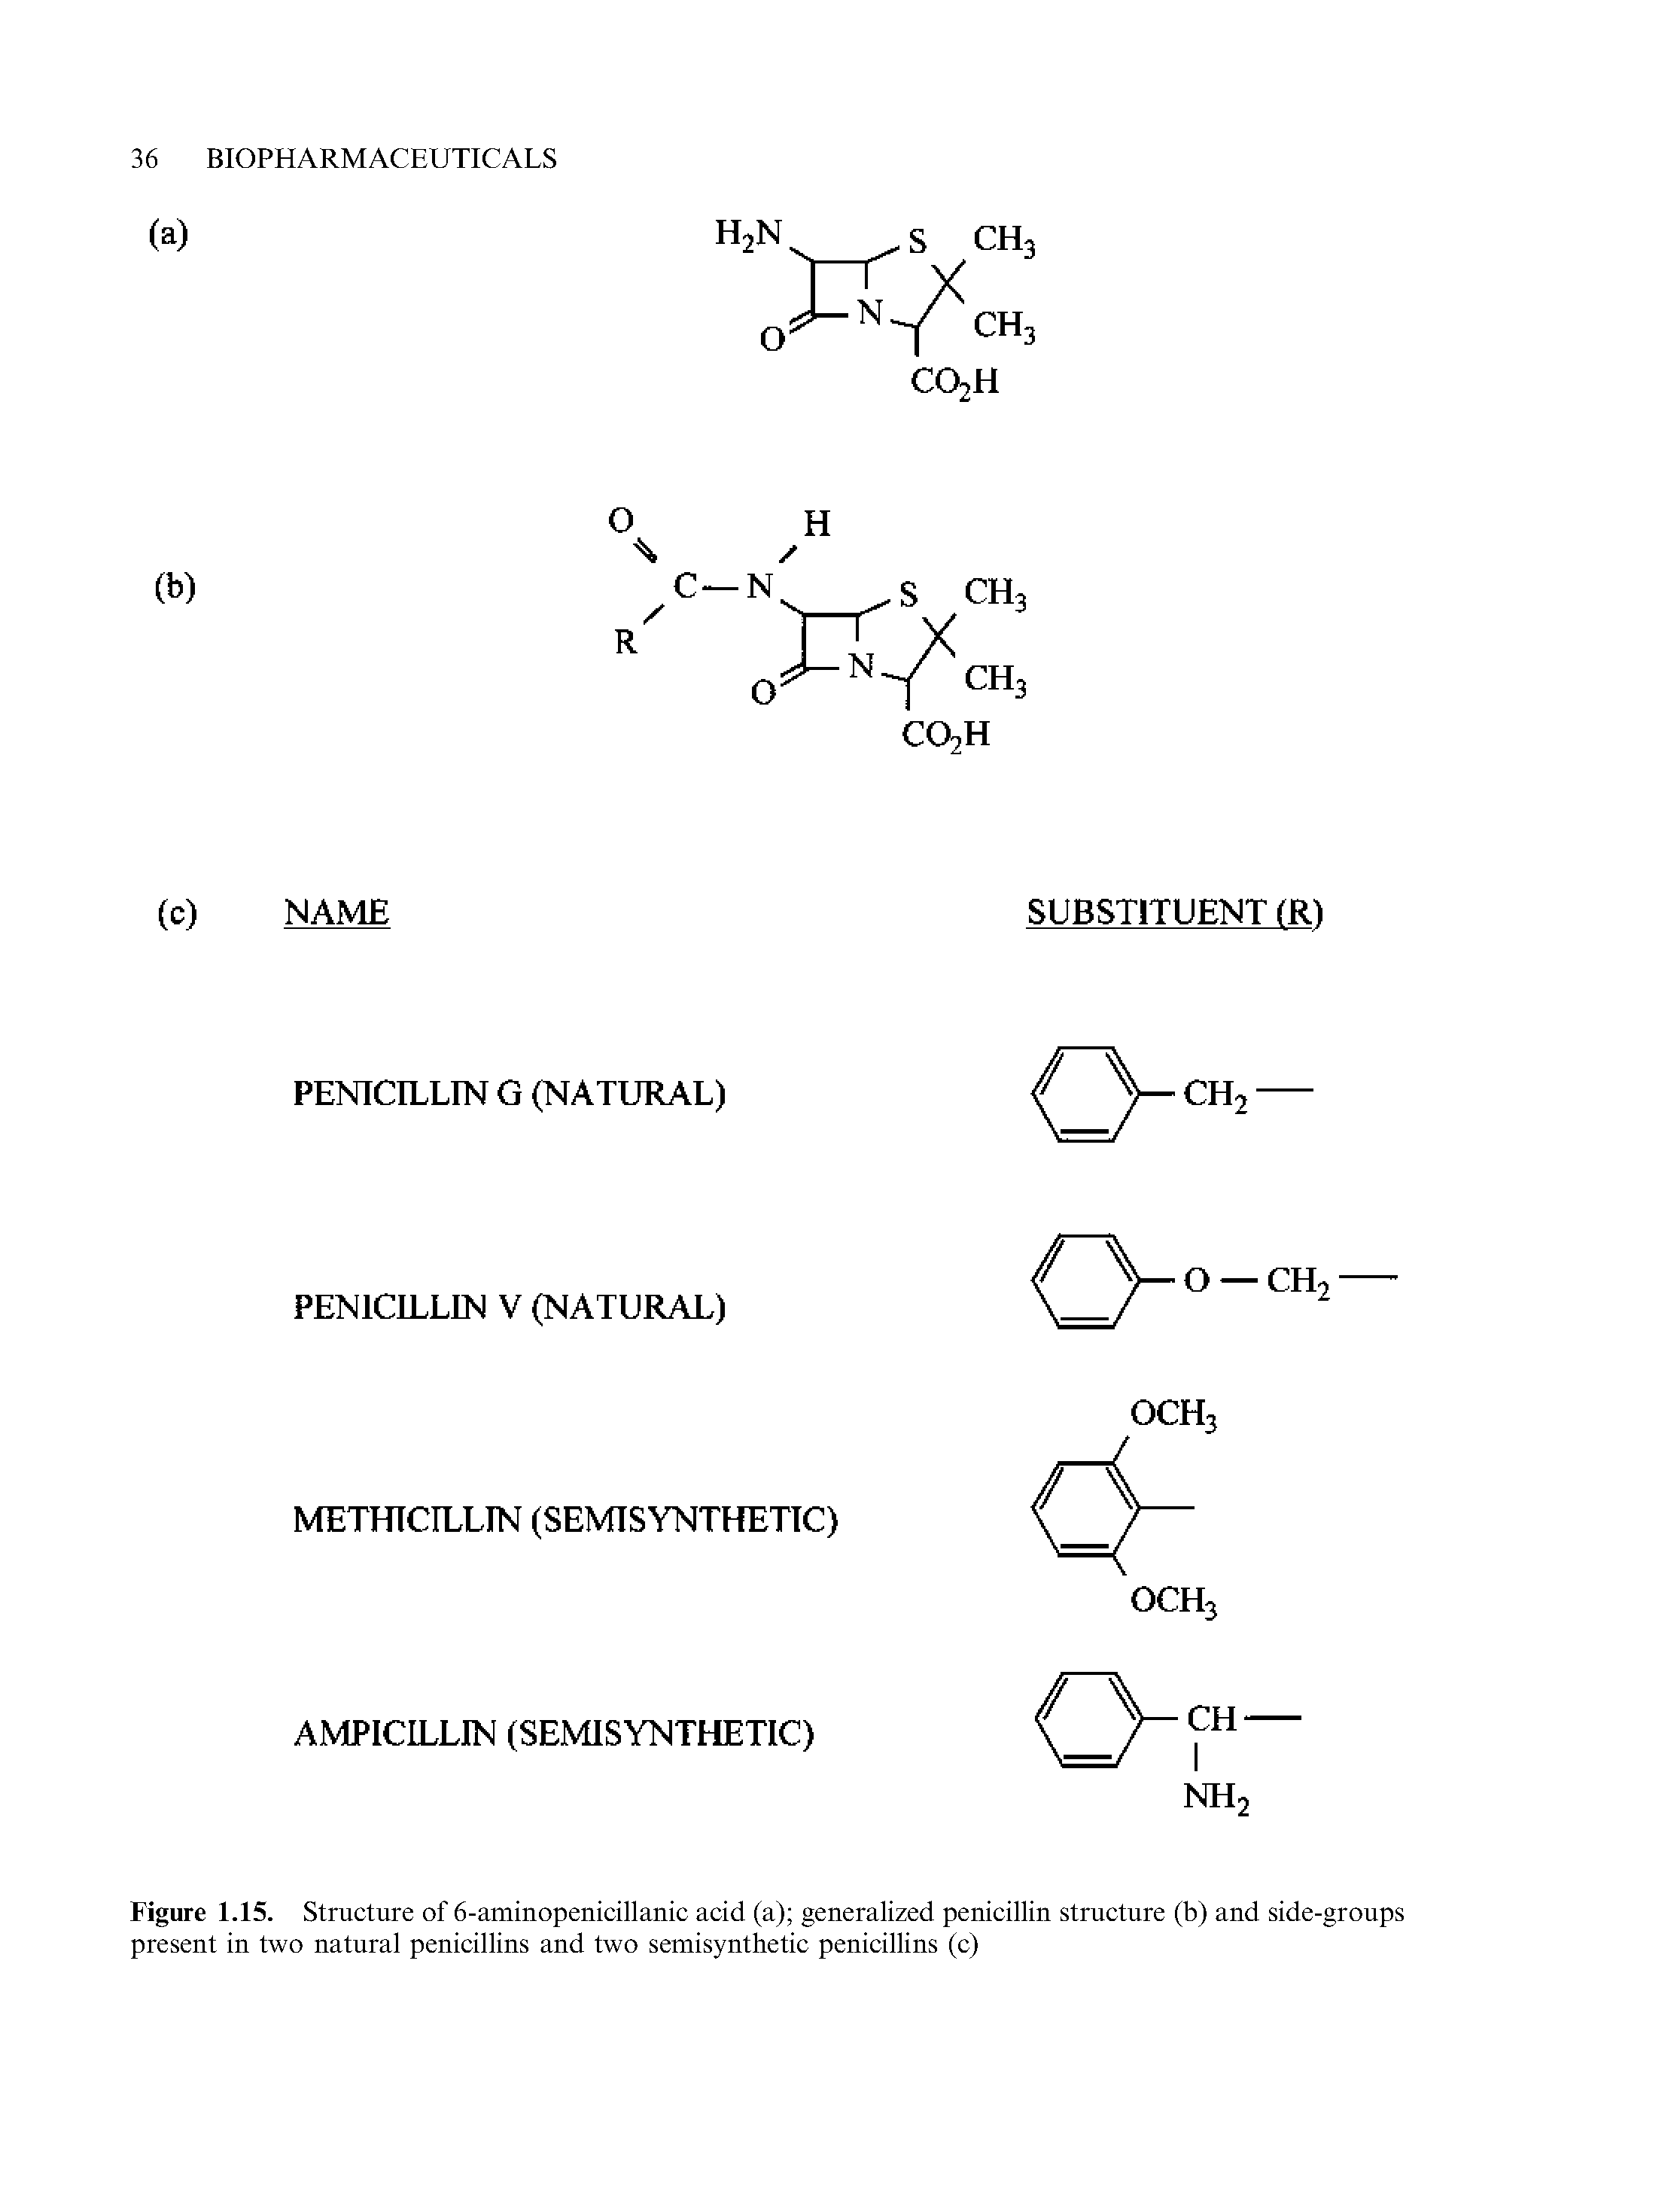 Figure 1.15. Structure of 6-aminopenicillanic acid (a) generalized penicillin structure (b) and side-groups present in two natural penicillins and two semisynthetic penicillins (c)...